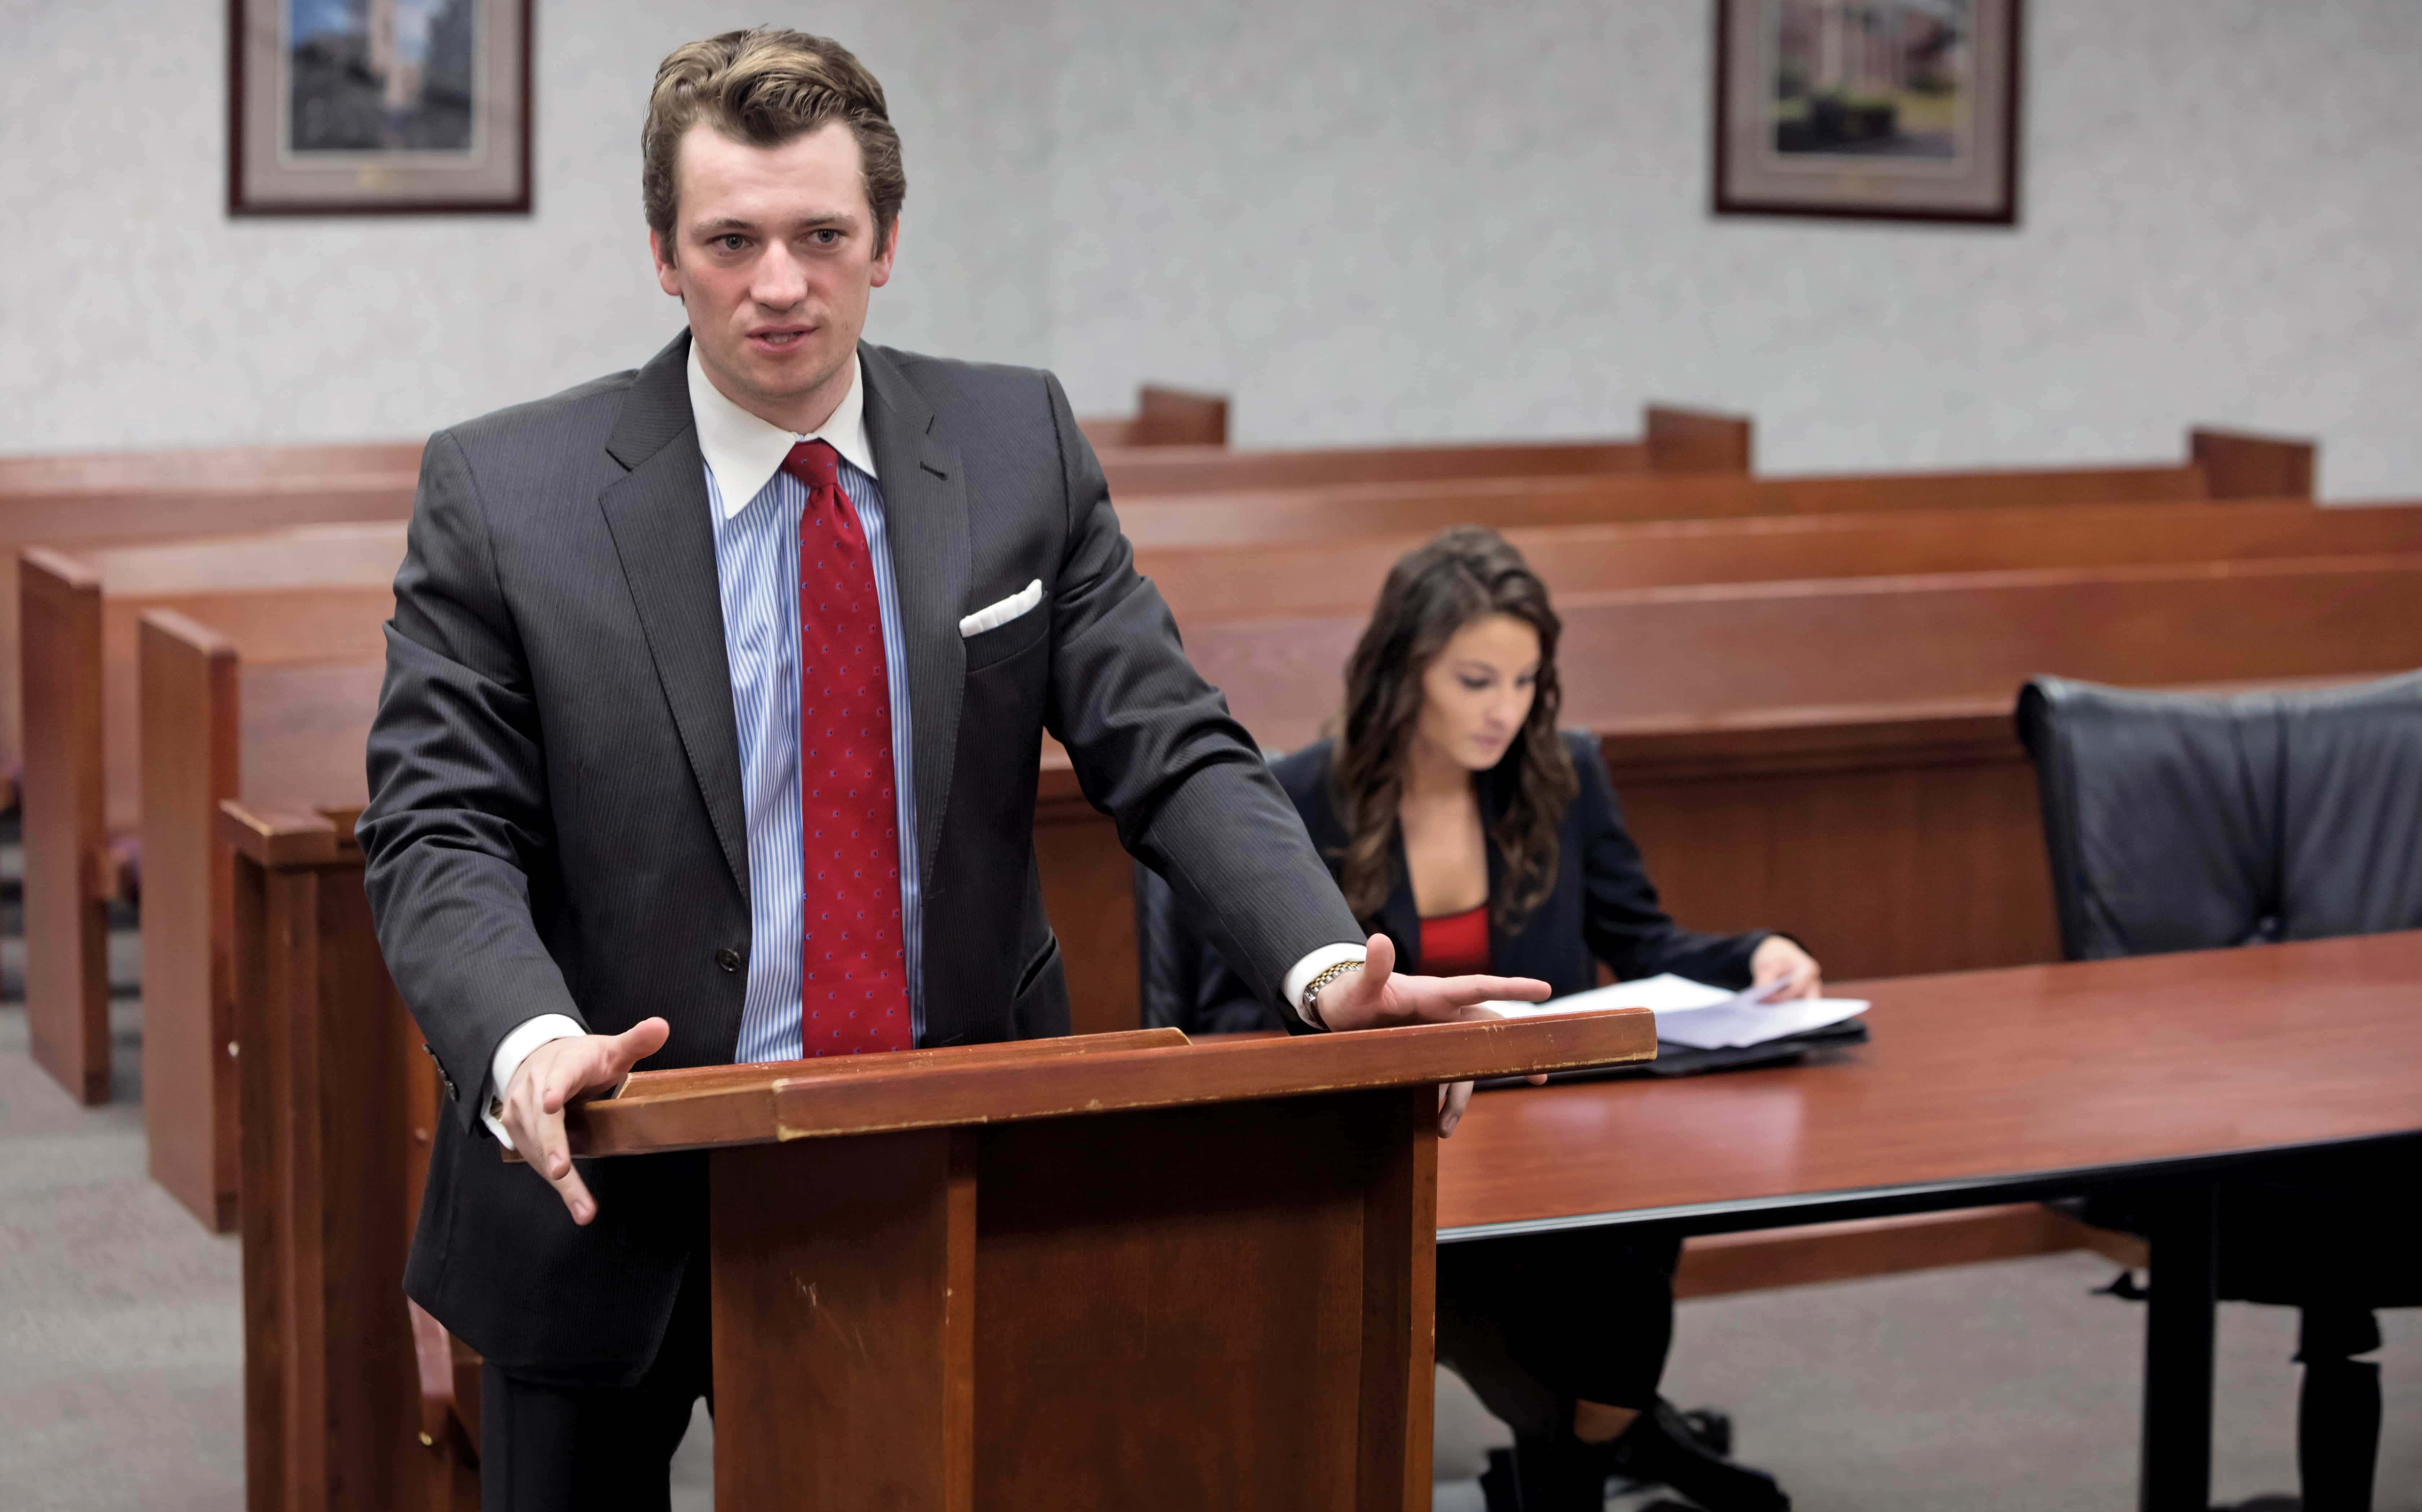 Law student in moot court room